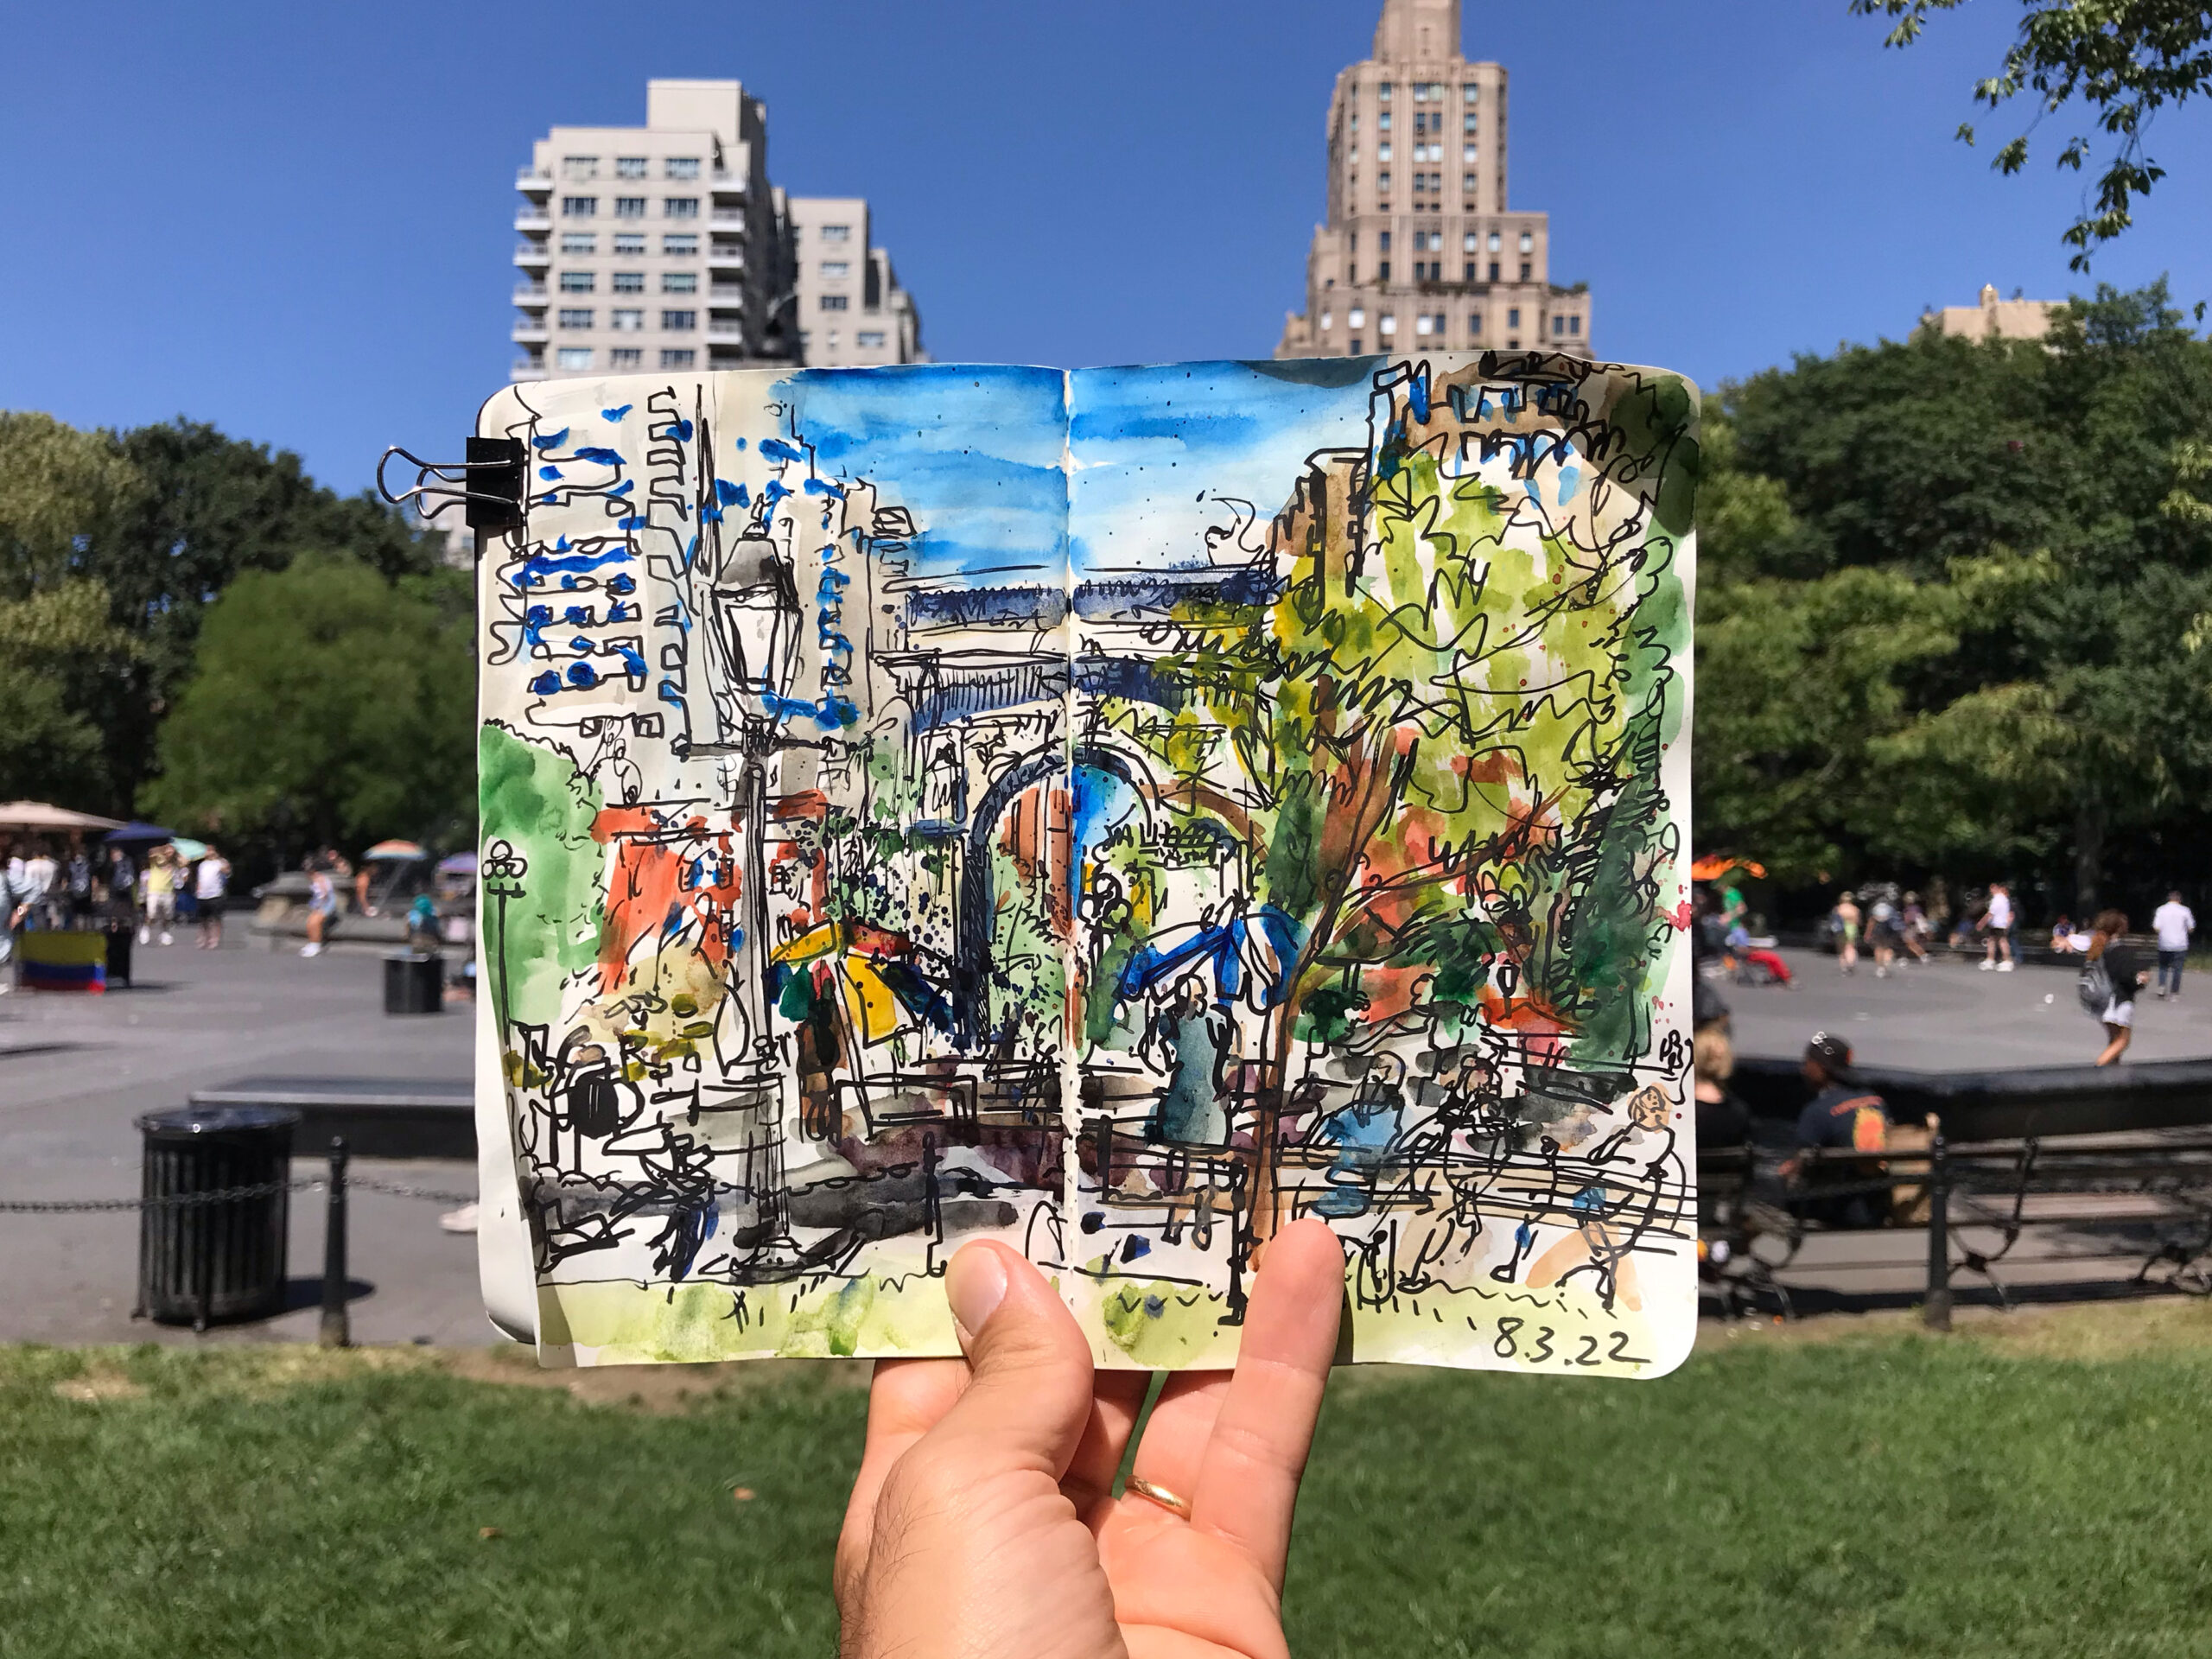 hand holding a sketchbook open to a watercolor image of the arch, trees, and people sitting on park benches